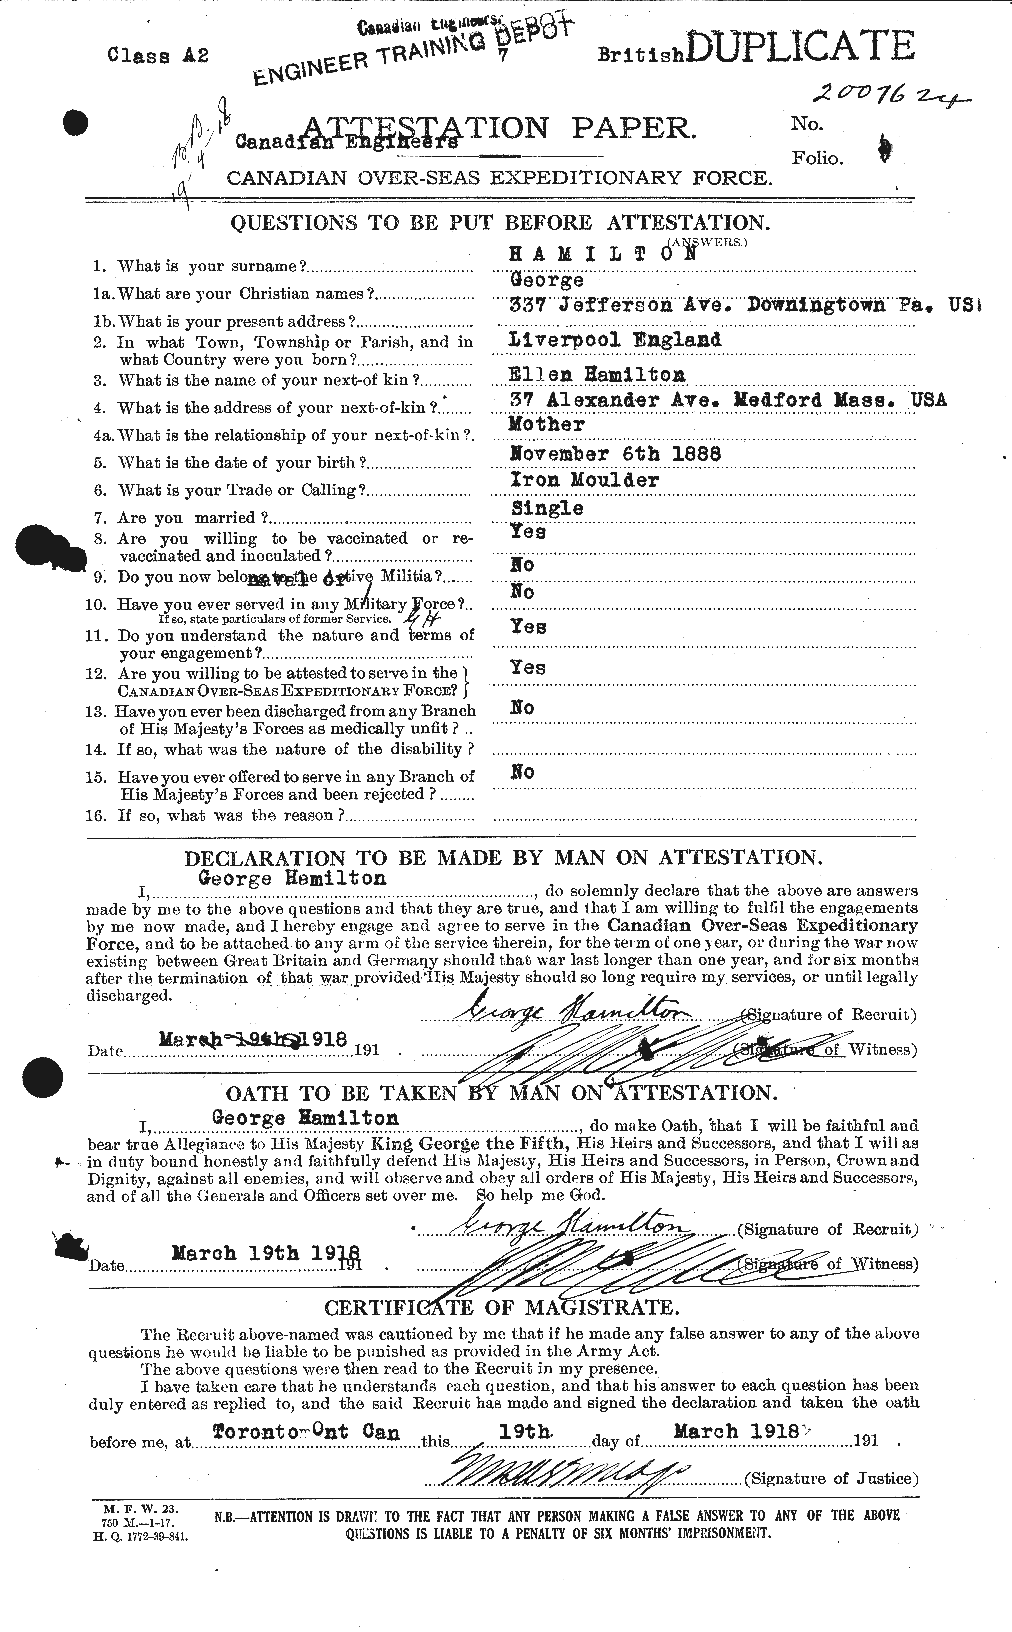 Personnel Records of the First World War - CEF 372444a